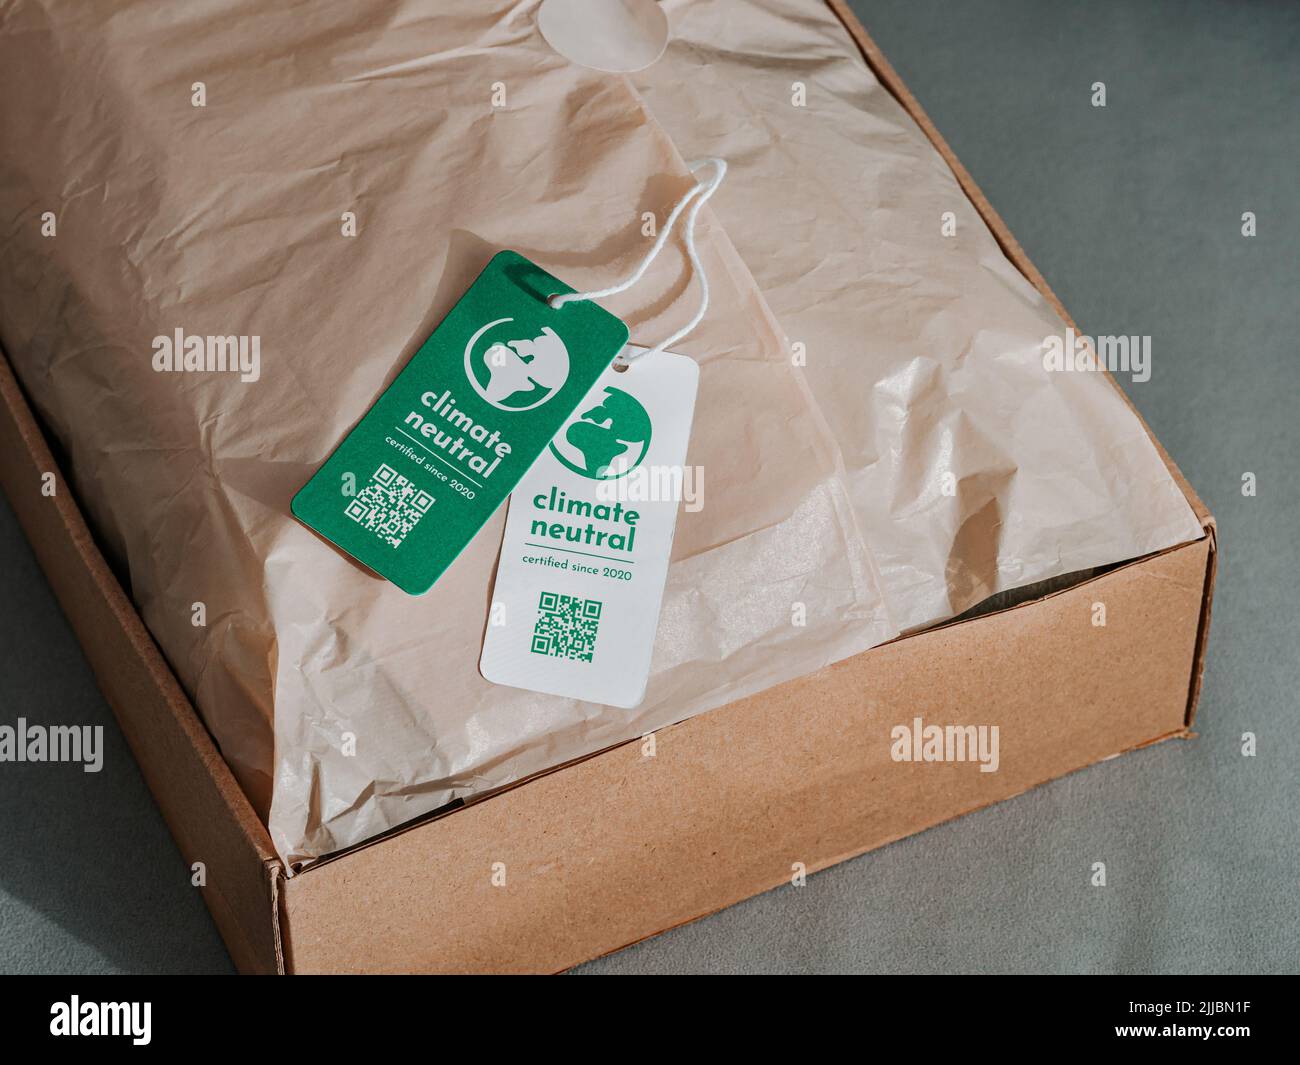 Carbon neutral product in craft corrugated box with label Climate neutral. Carbon neutral label concept in apparel, fashion, logistics indusrty and ethical consumption. Increasing awareness for customers about carbon footpint Stock Photo